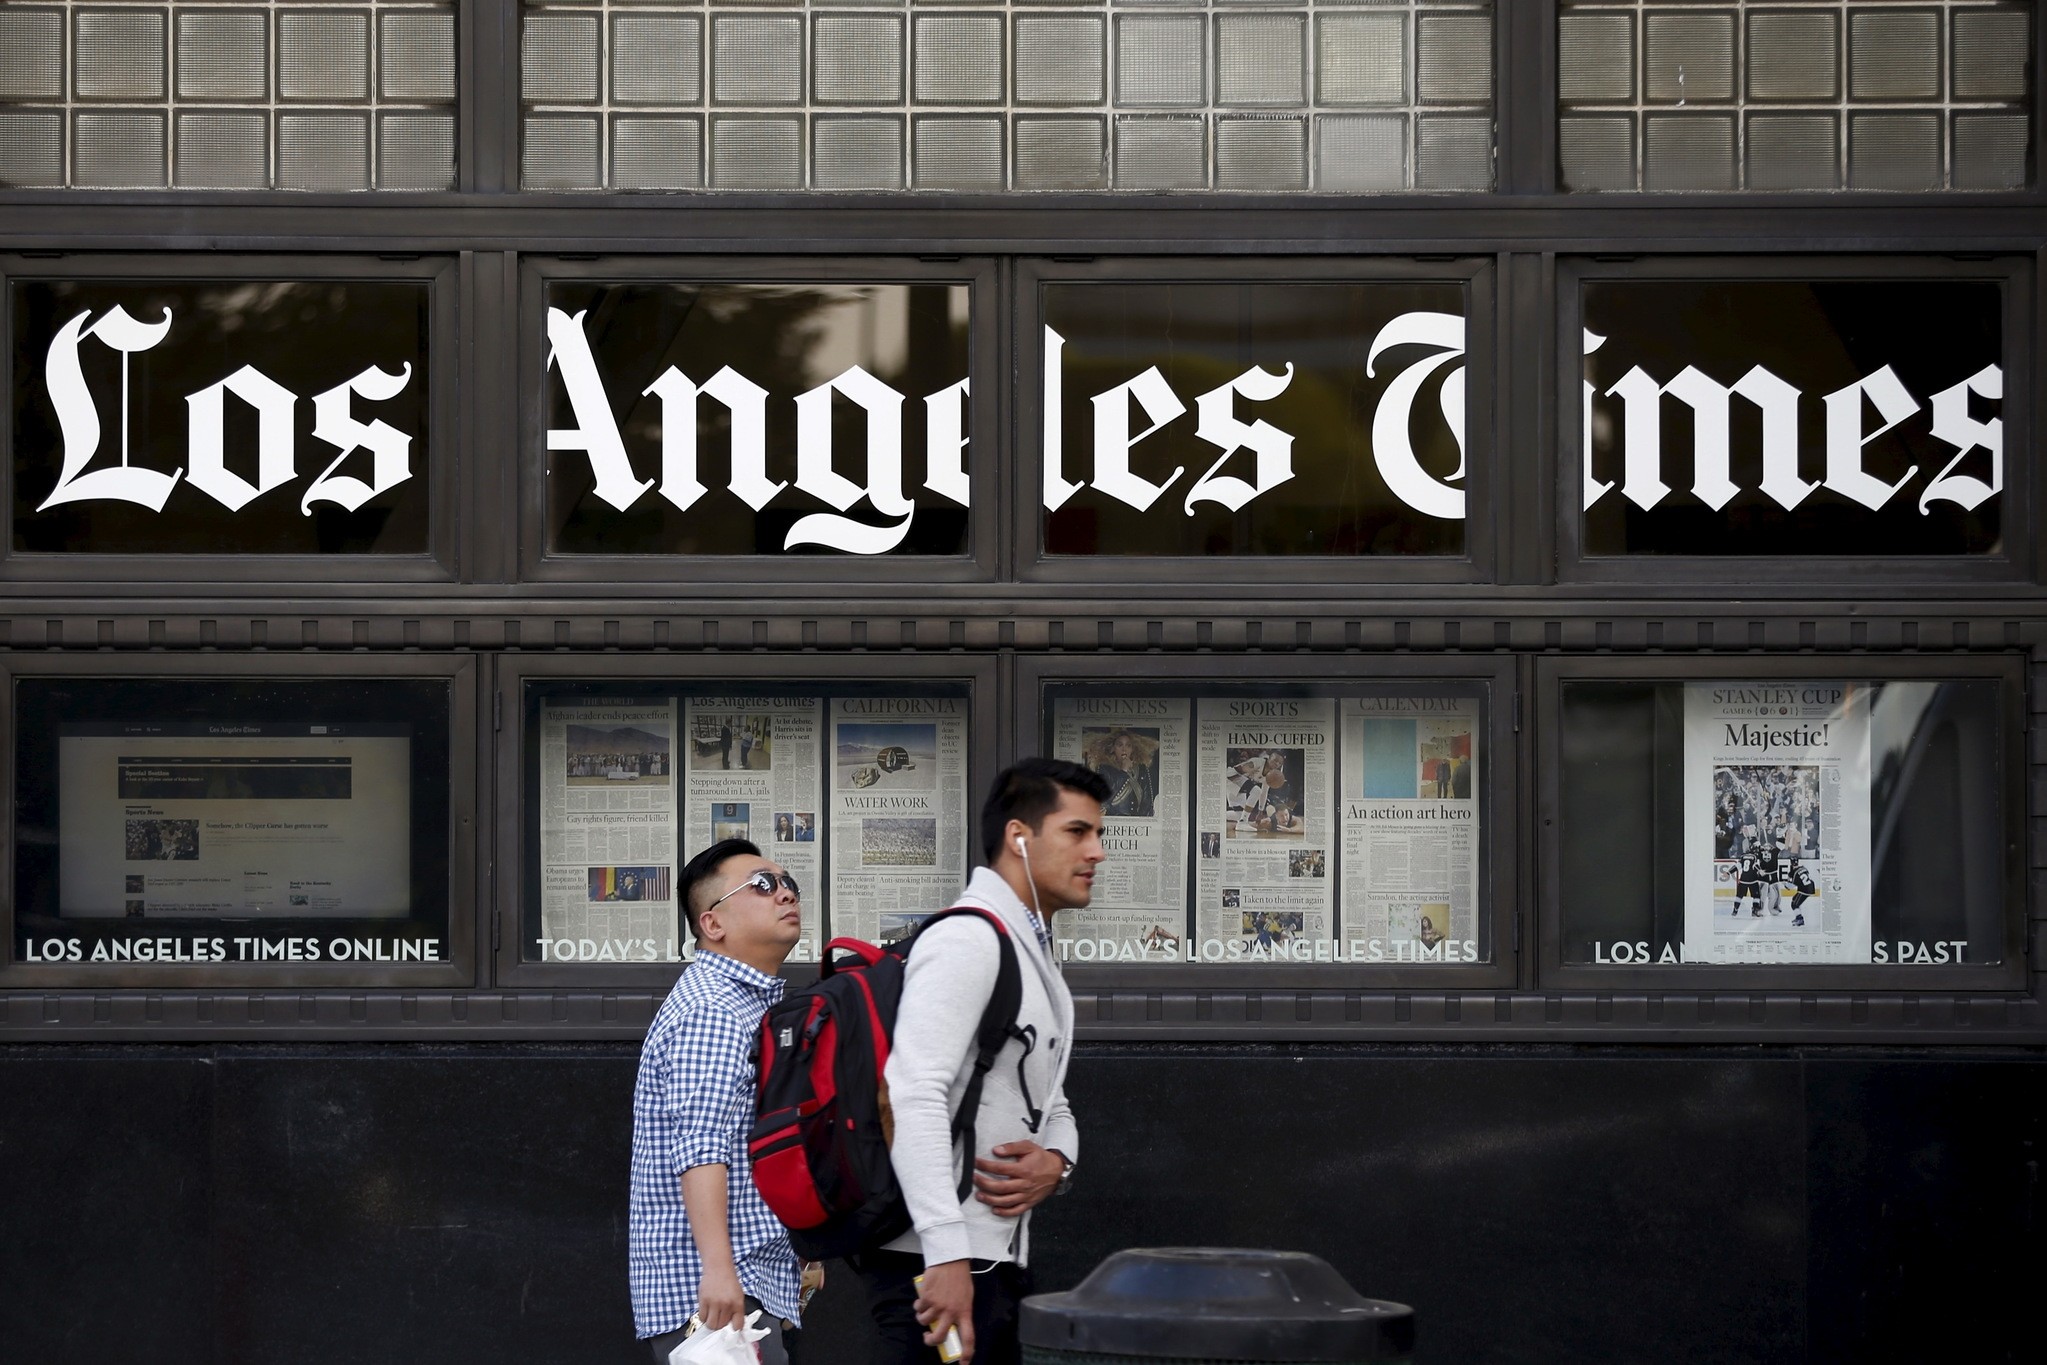 People walk past the building of Los Angeles Times newspaper, which is owned by Tribune Publishing Co, in Los Angeles, California, US, April 27, 2016. (Reuters Photo)